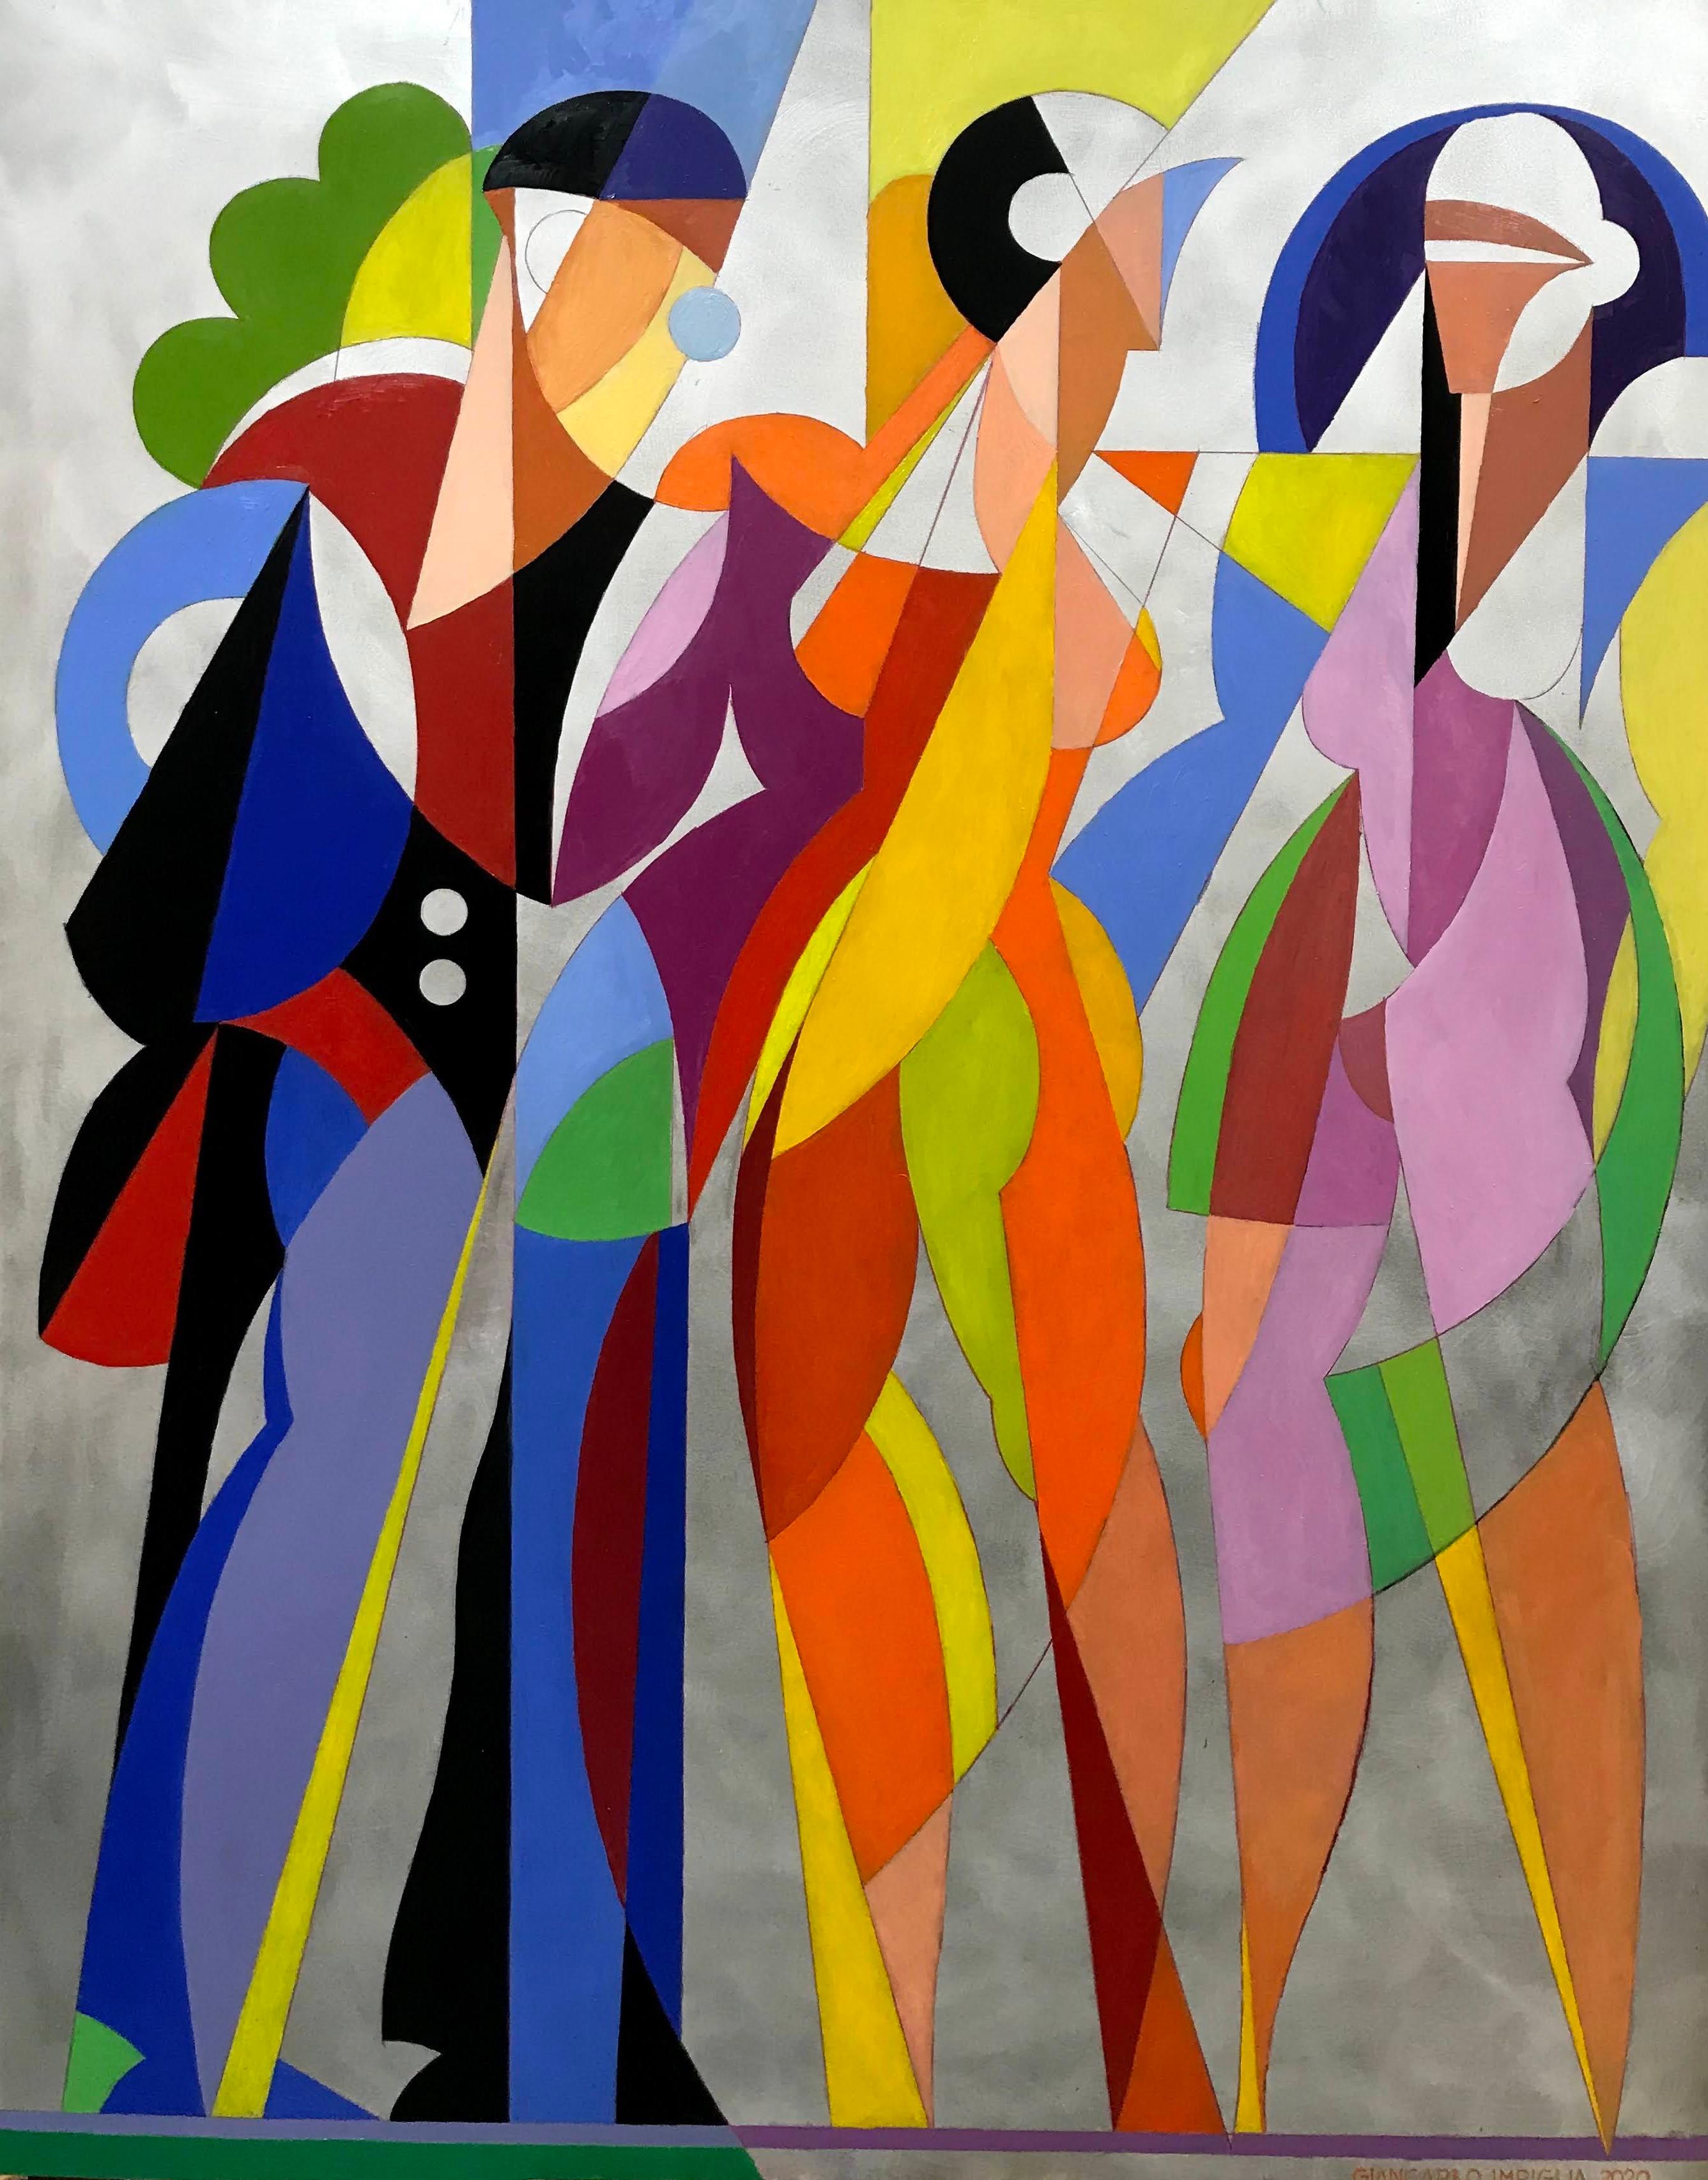 Giancarlo Impiglia - Figurative, pop art oil painting, "Fortuitous  Encounters" For Sale at 1stDibs